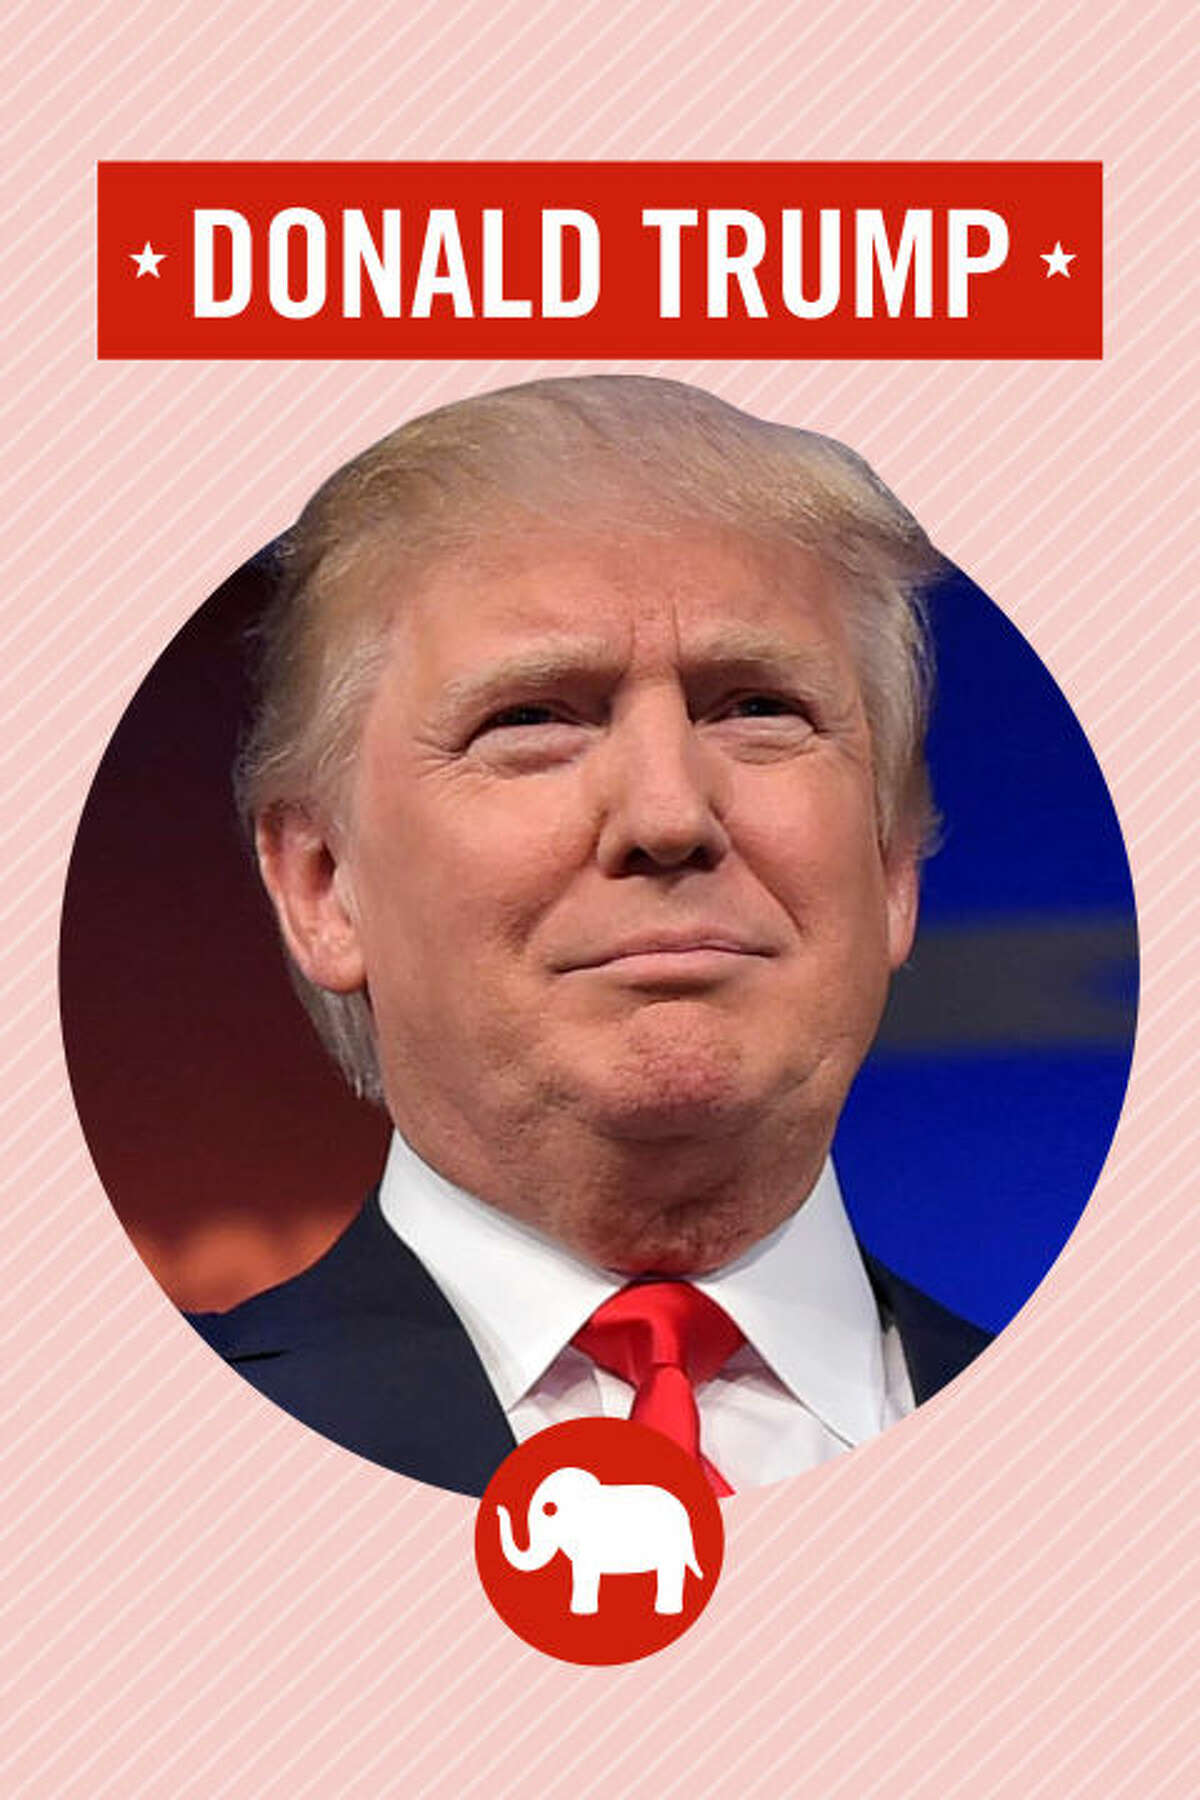 Who Supports Donald Trump?